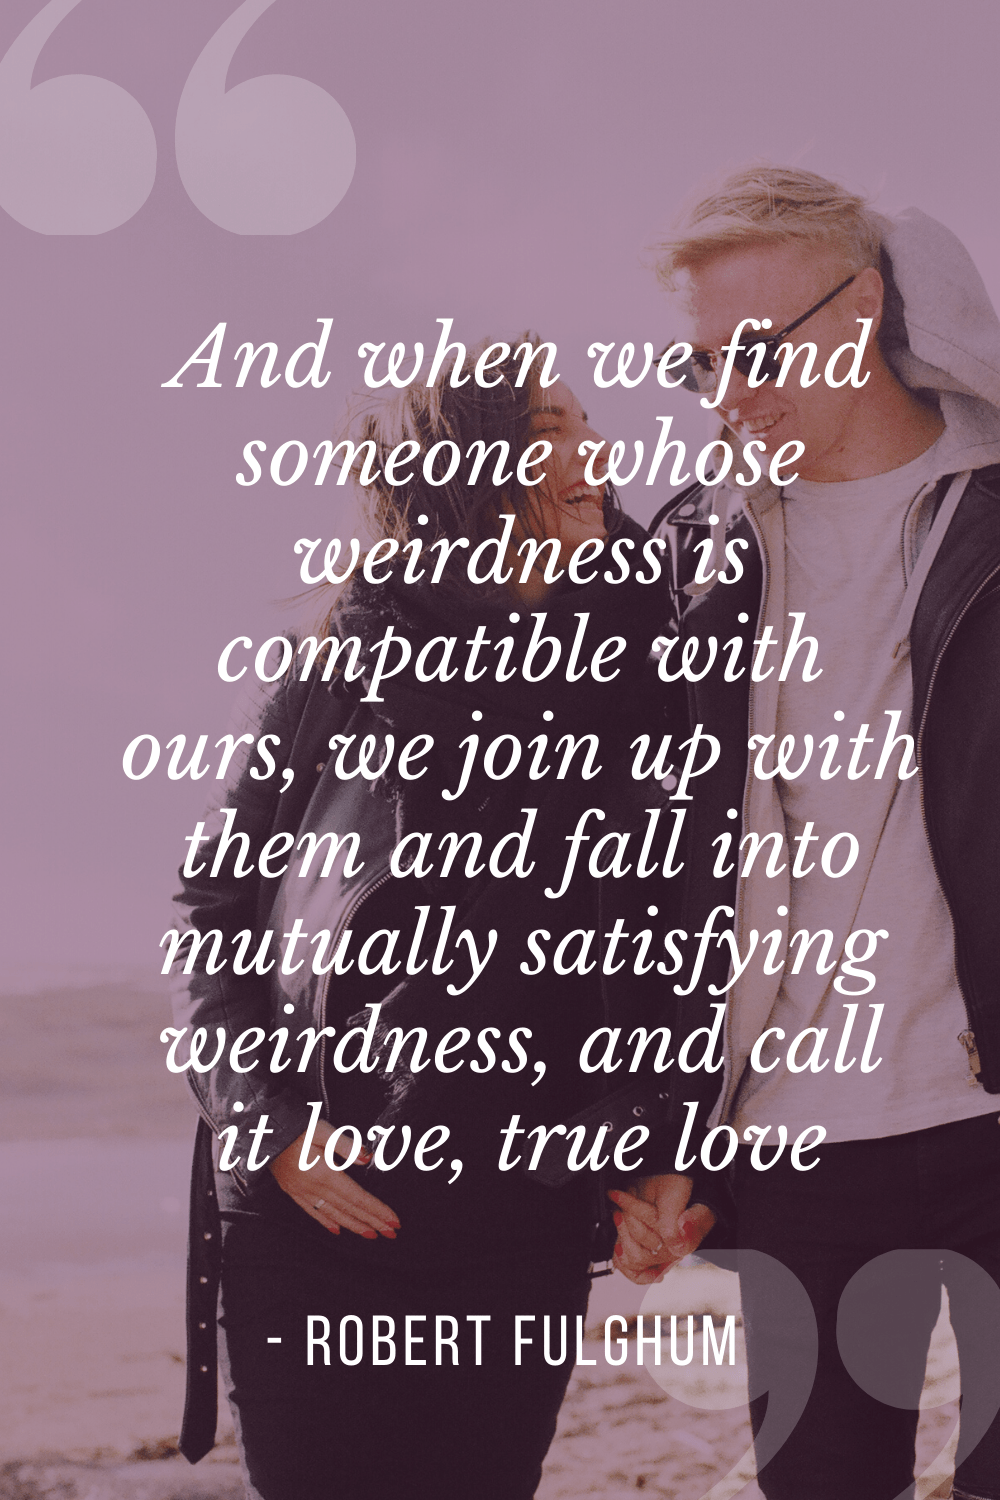 “We join up with them and fall into mutually satisfying weirdness, and call it love, true love”, Robert Fulghum